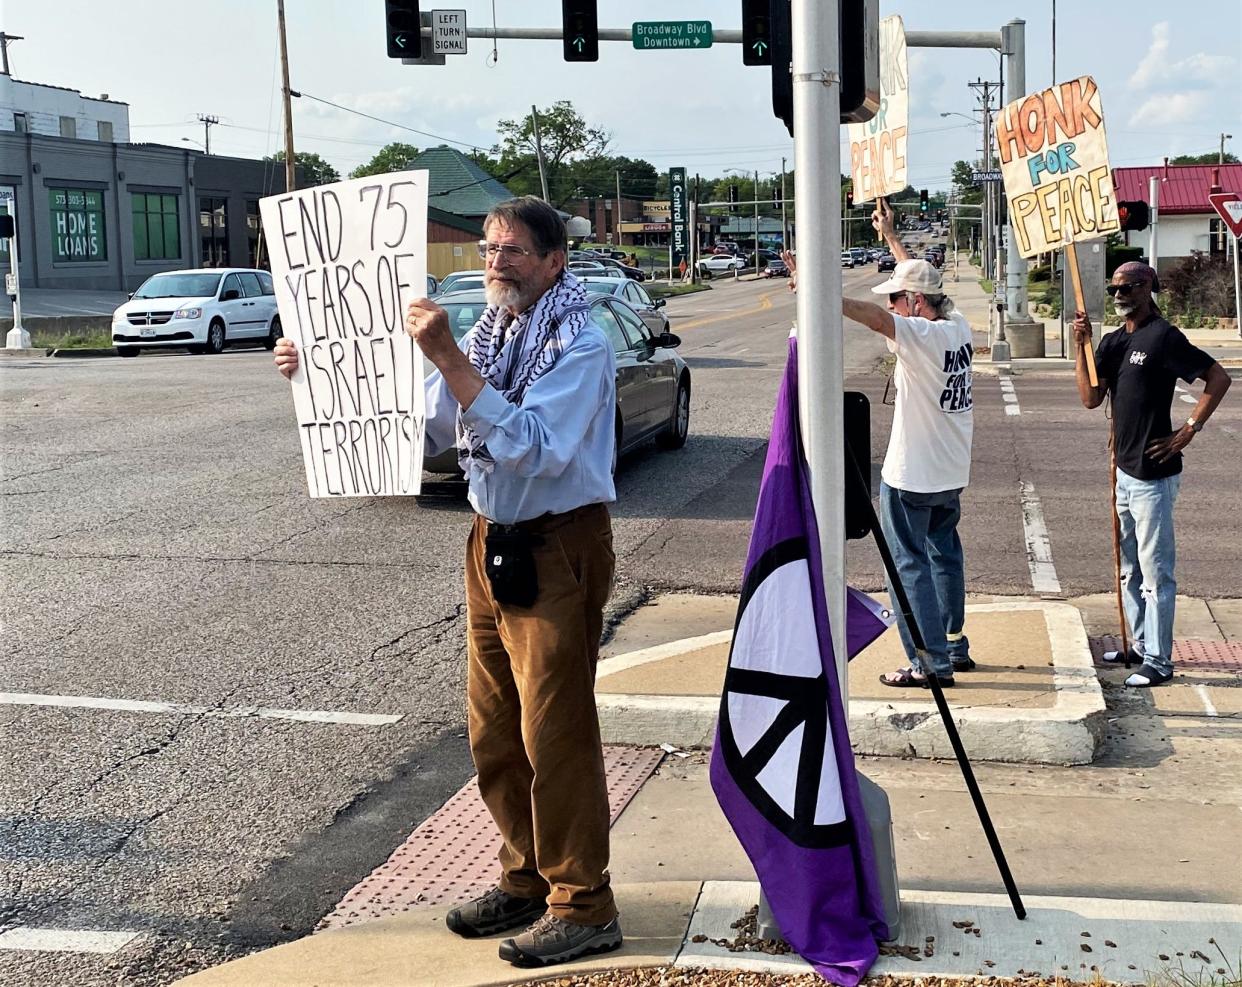 George Smith, University of Missouri professor emeritus and Nobel Prize winner, on Wednesday joined protesters at Broadway and Providence commemorating Monday's 75th anniversary of what is known as the Nakba, the forced removal of Palestinians from their towns and villages by Zionists.